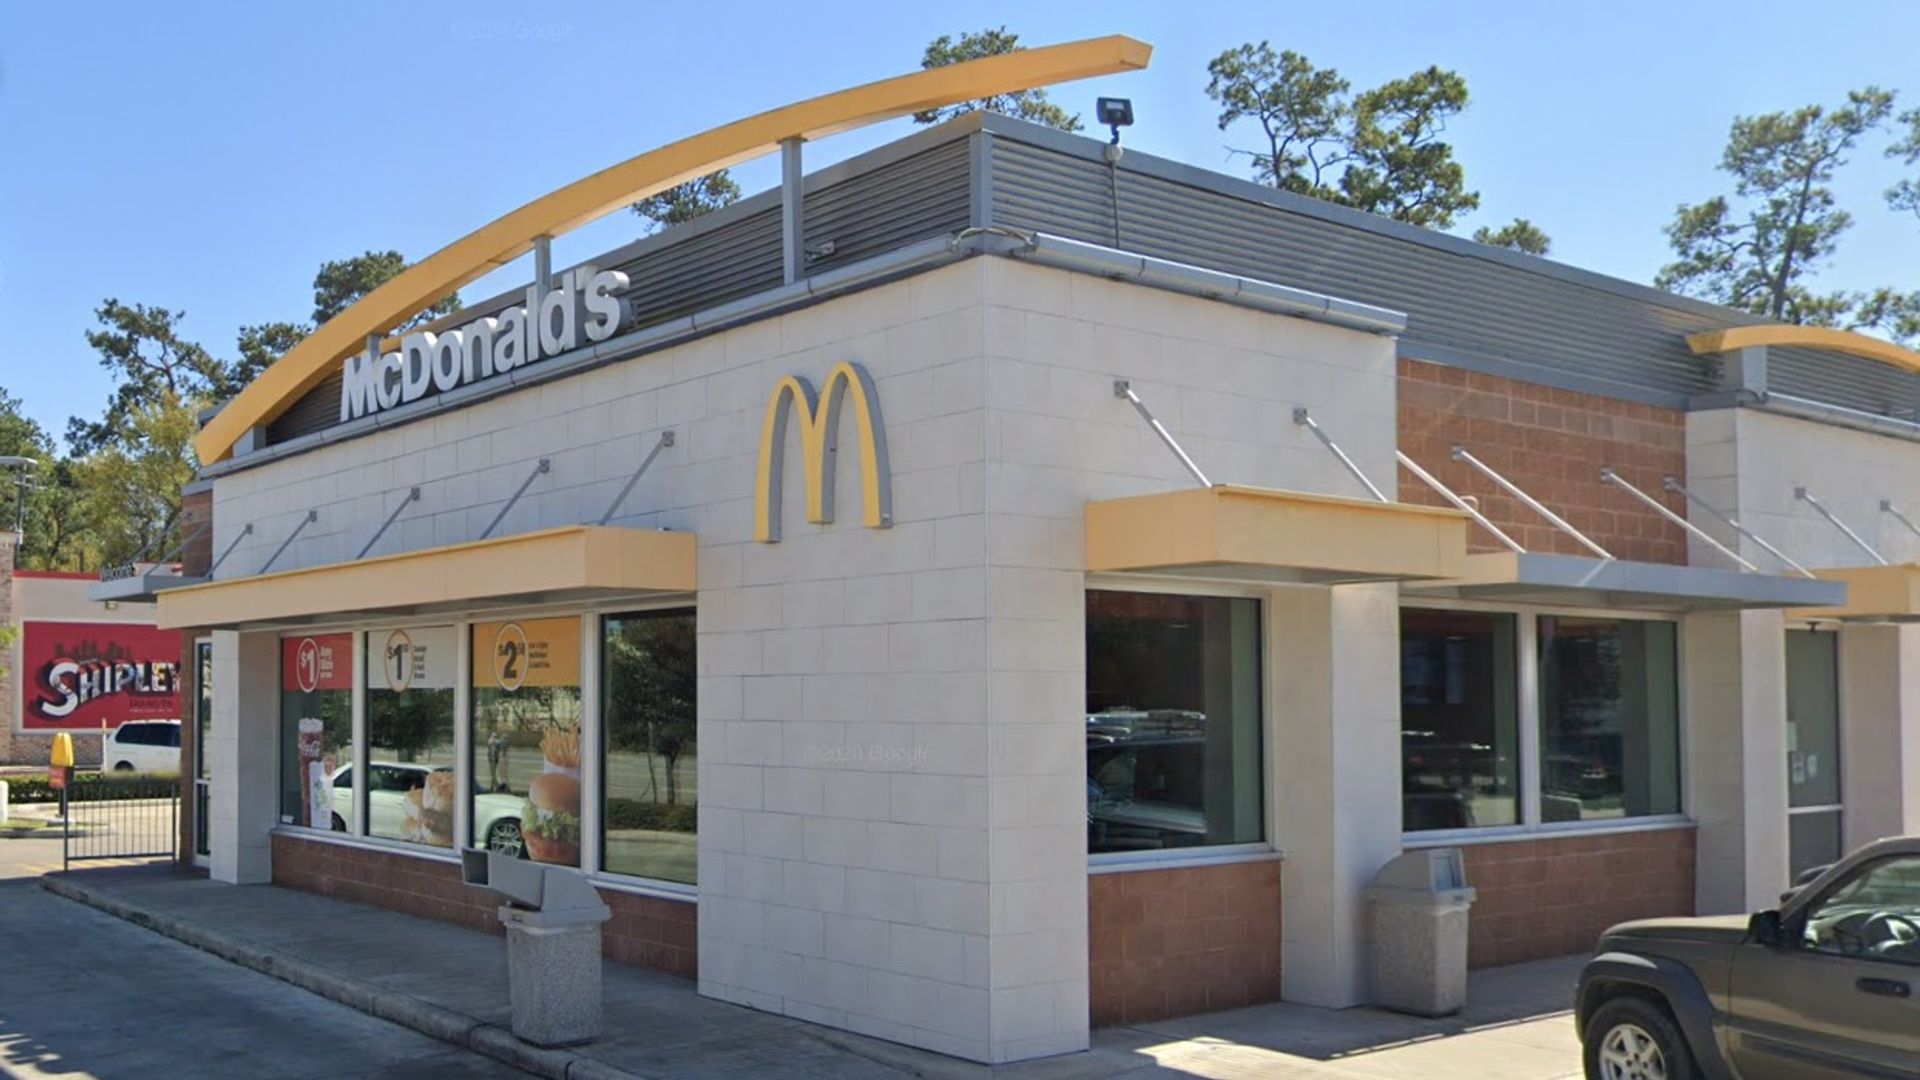 Angry McDonald's customer who wanted refund shoots and kills lawyer